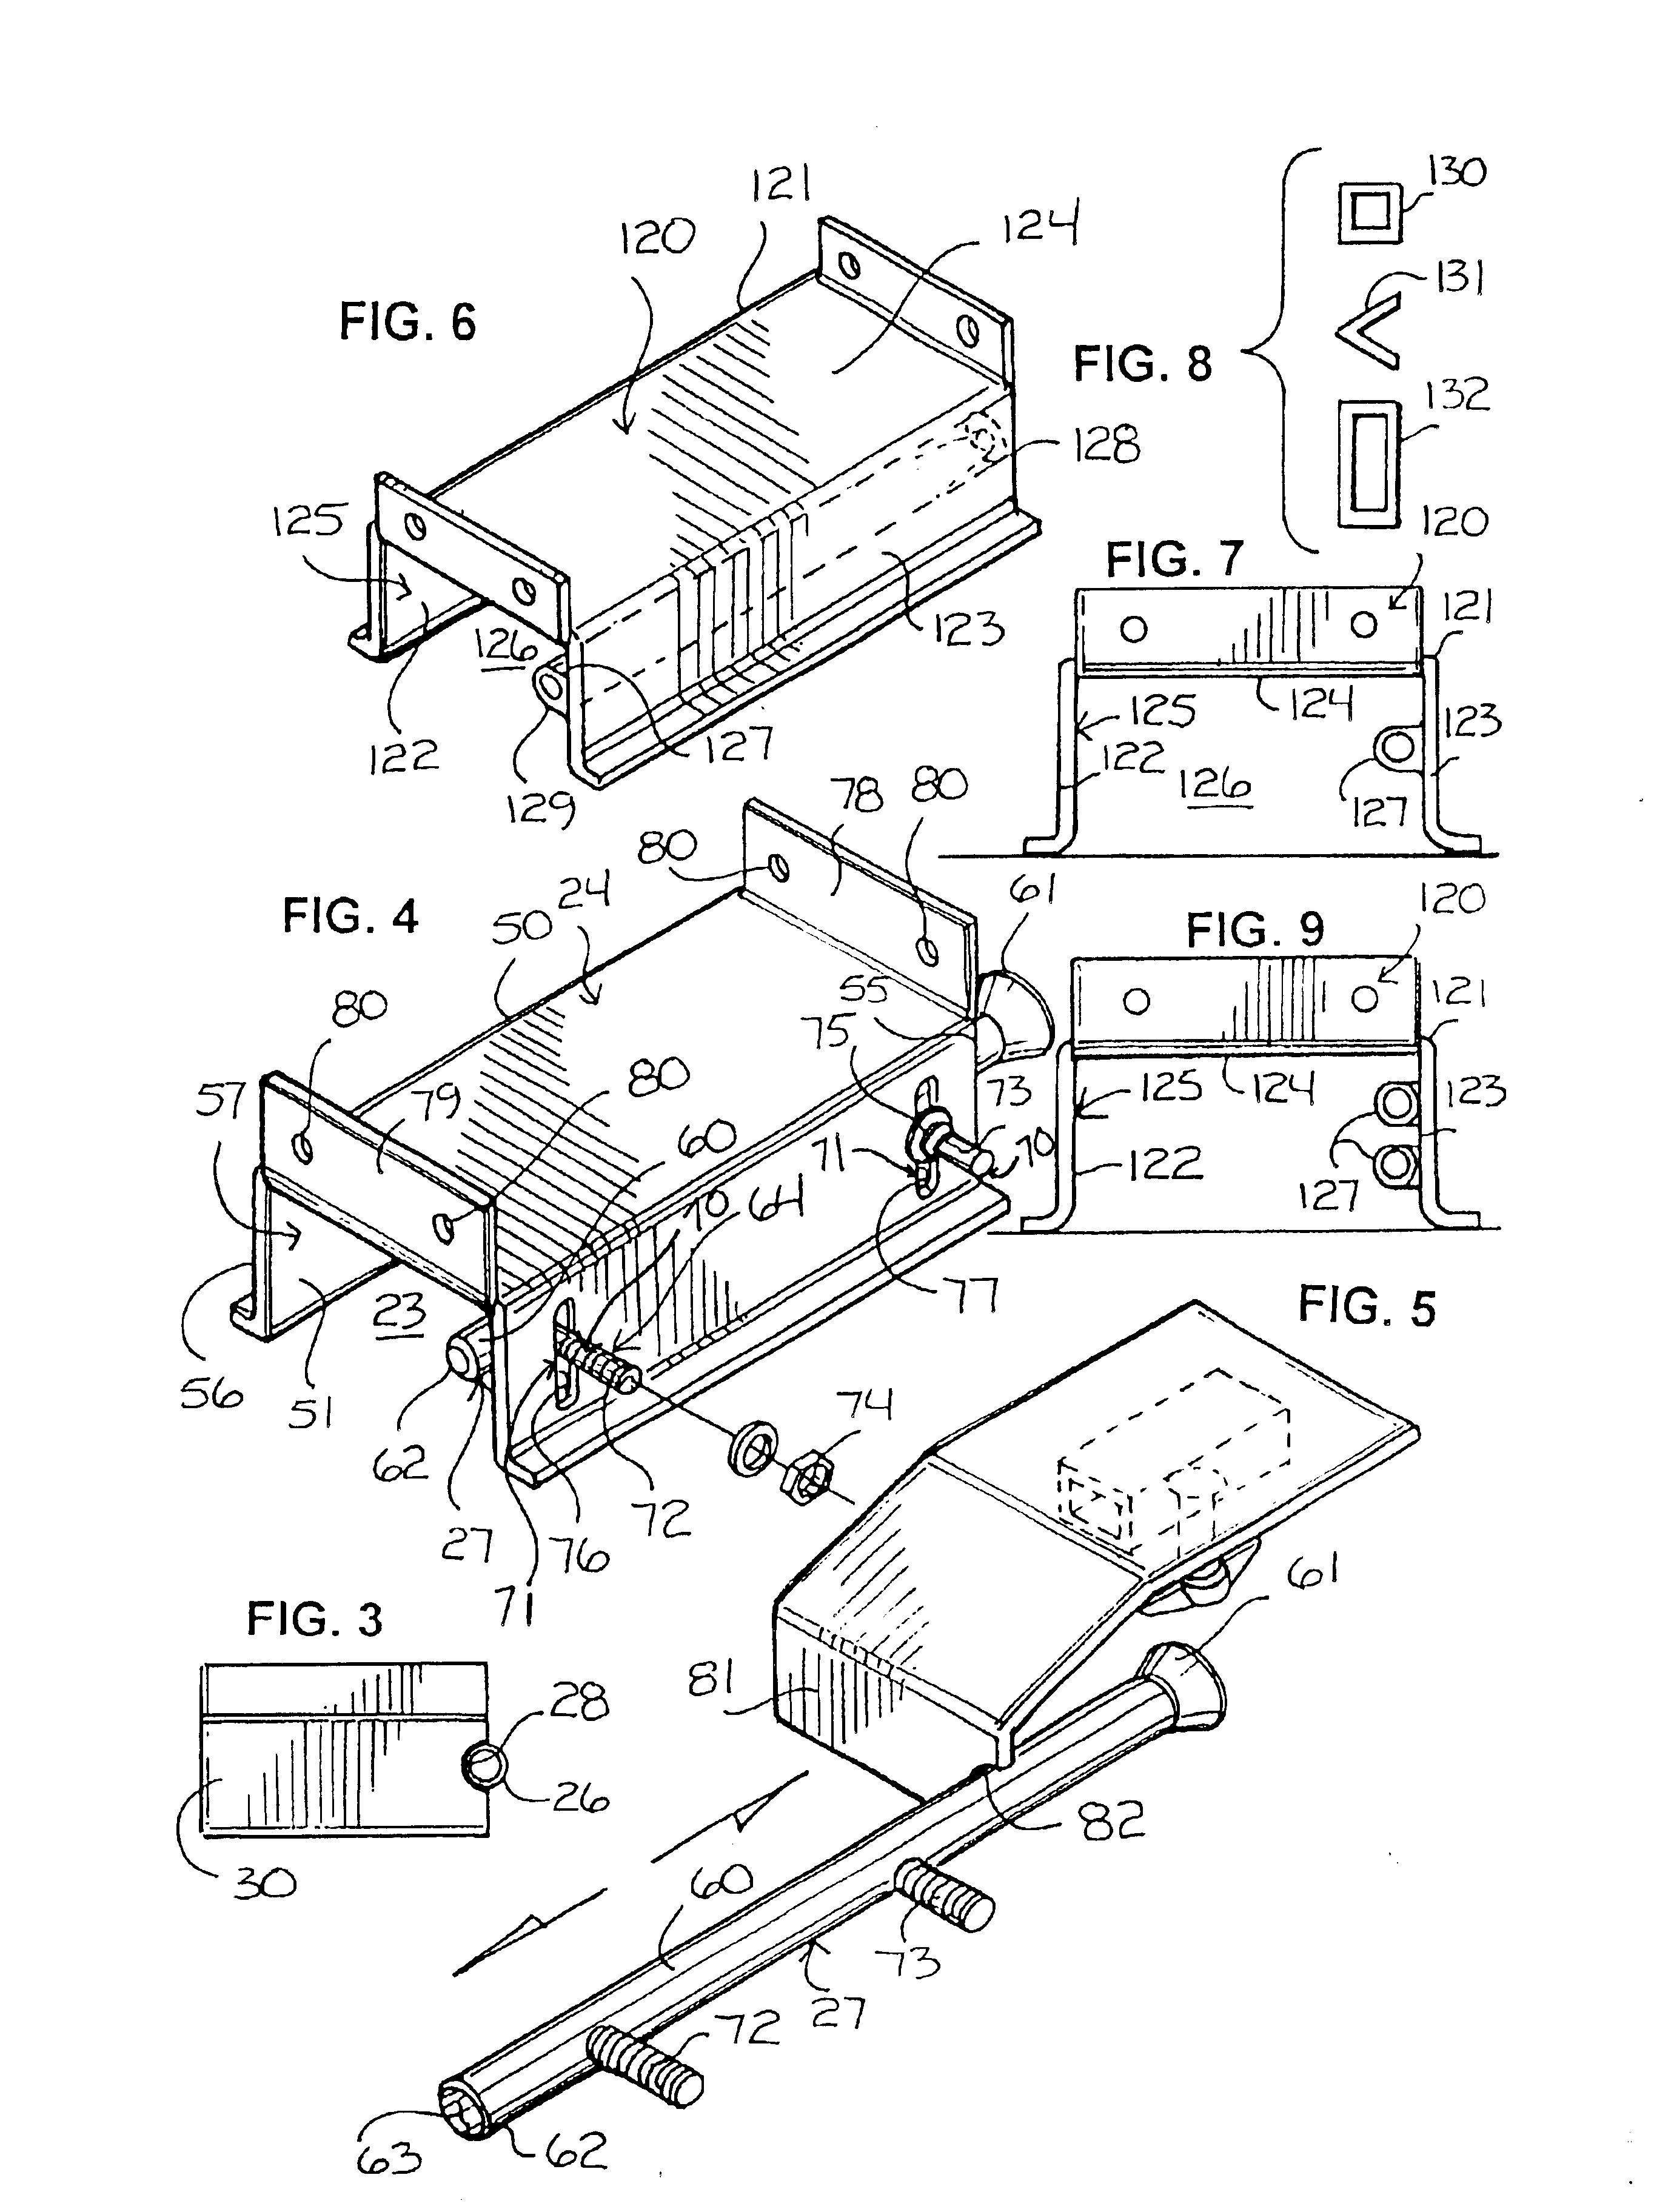 Curb forming apparatus and methods